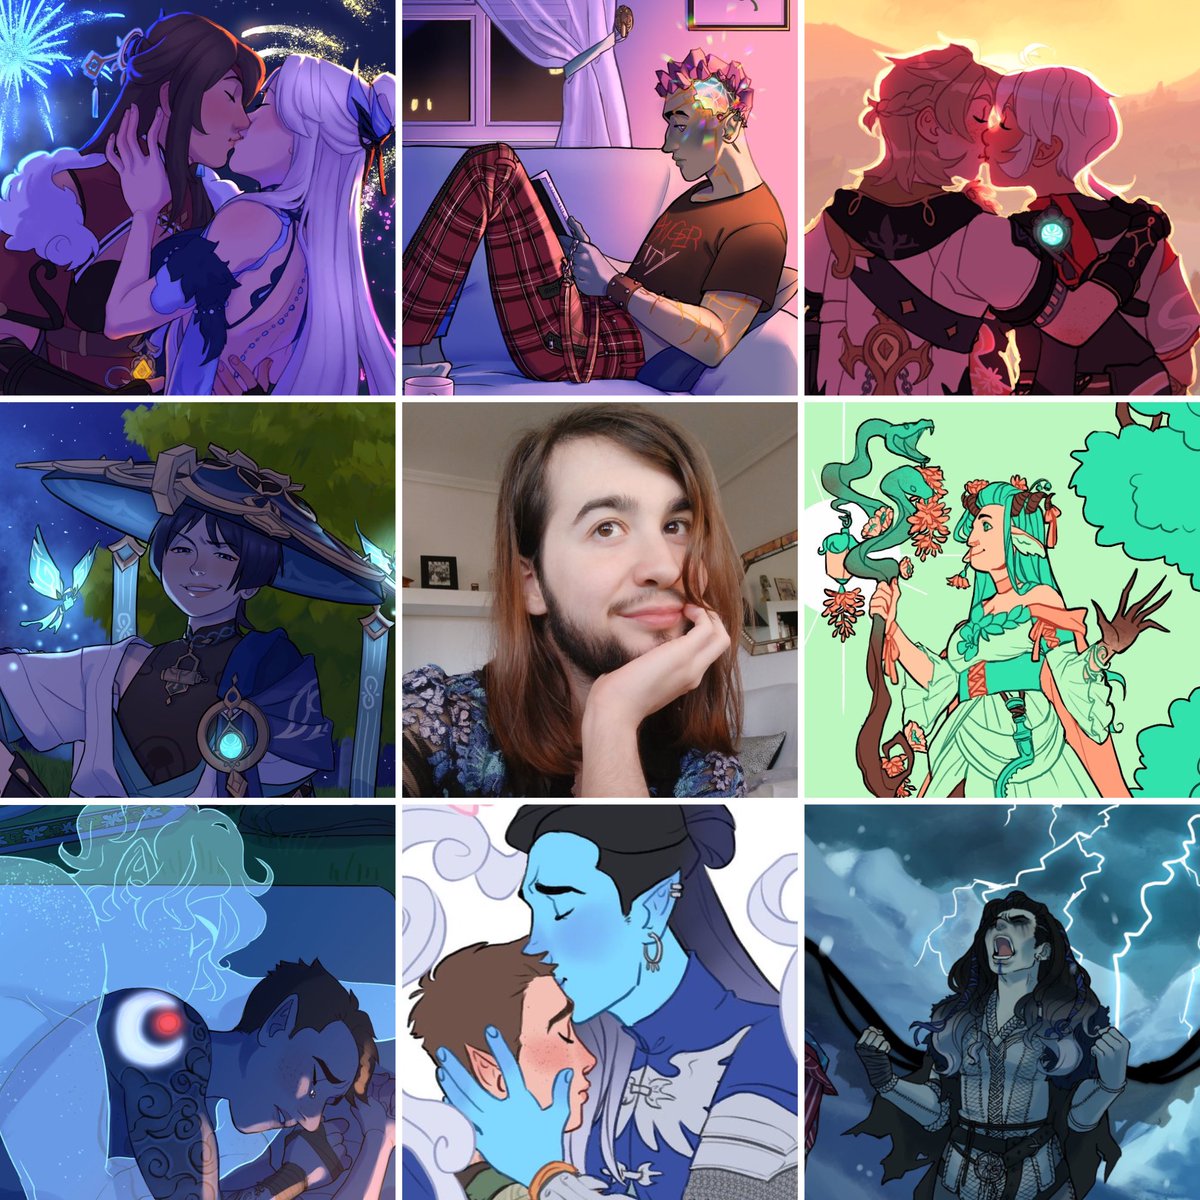 Here's my #artvsartist! 

I didn't draw much this year being so sick and all, but going for a "few but polished" approach was way healthier for me than trying to force myself to constantly churn out art I wasn't satisfied with. I can be proud of myself 💙 